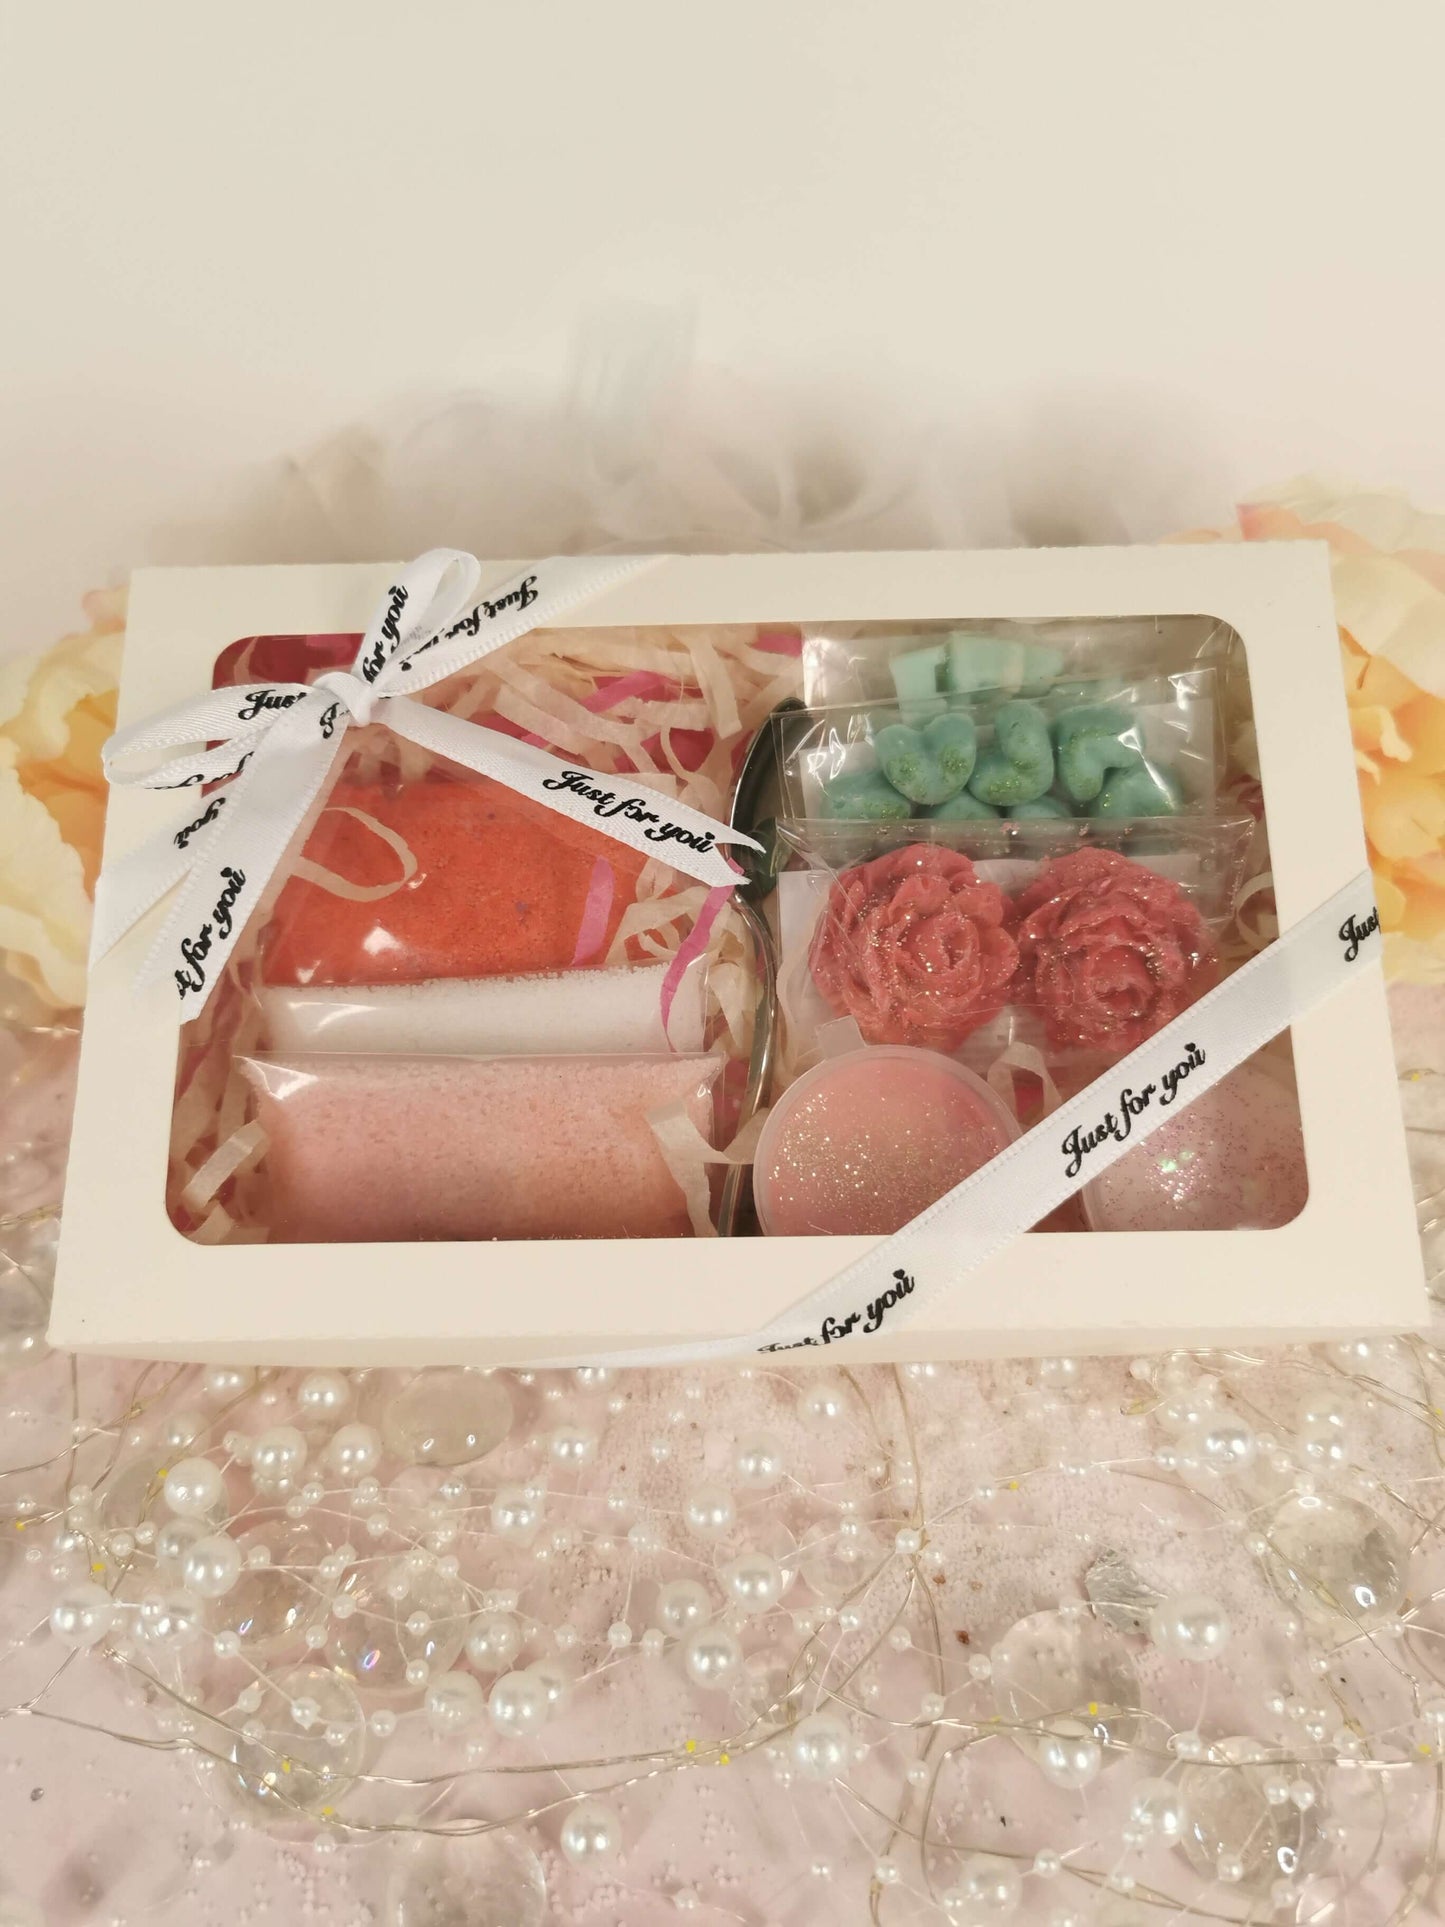 Scented fondant discovery box